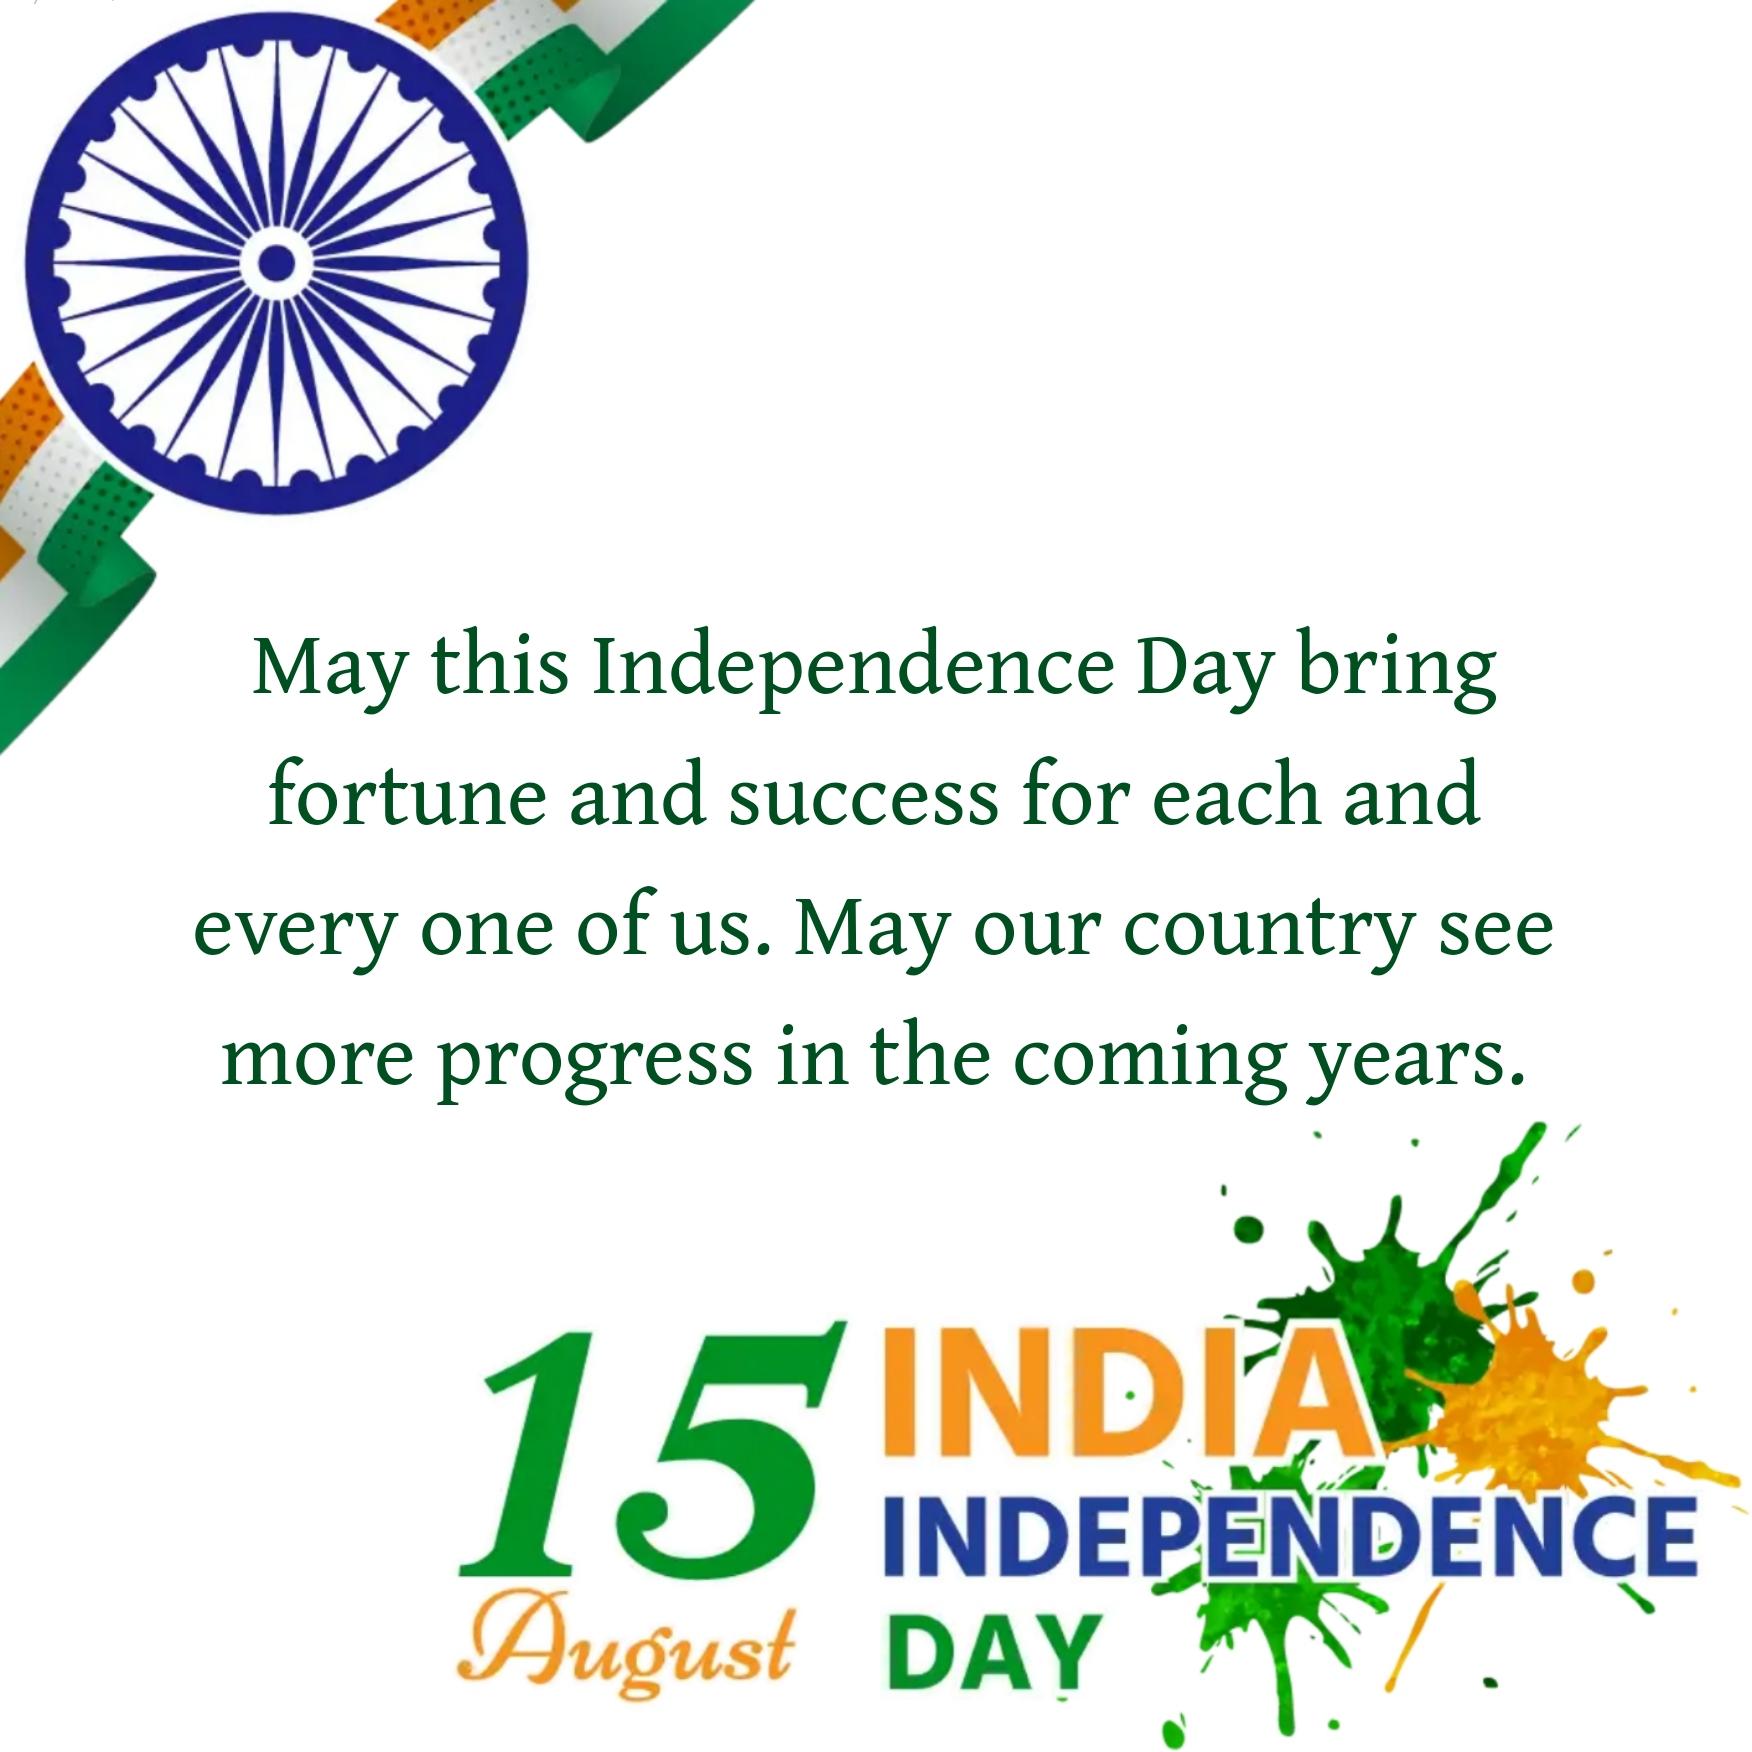 May this Independence Day bring fortune and success